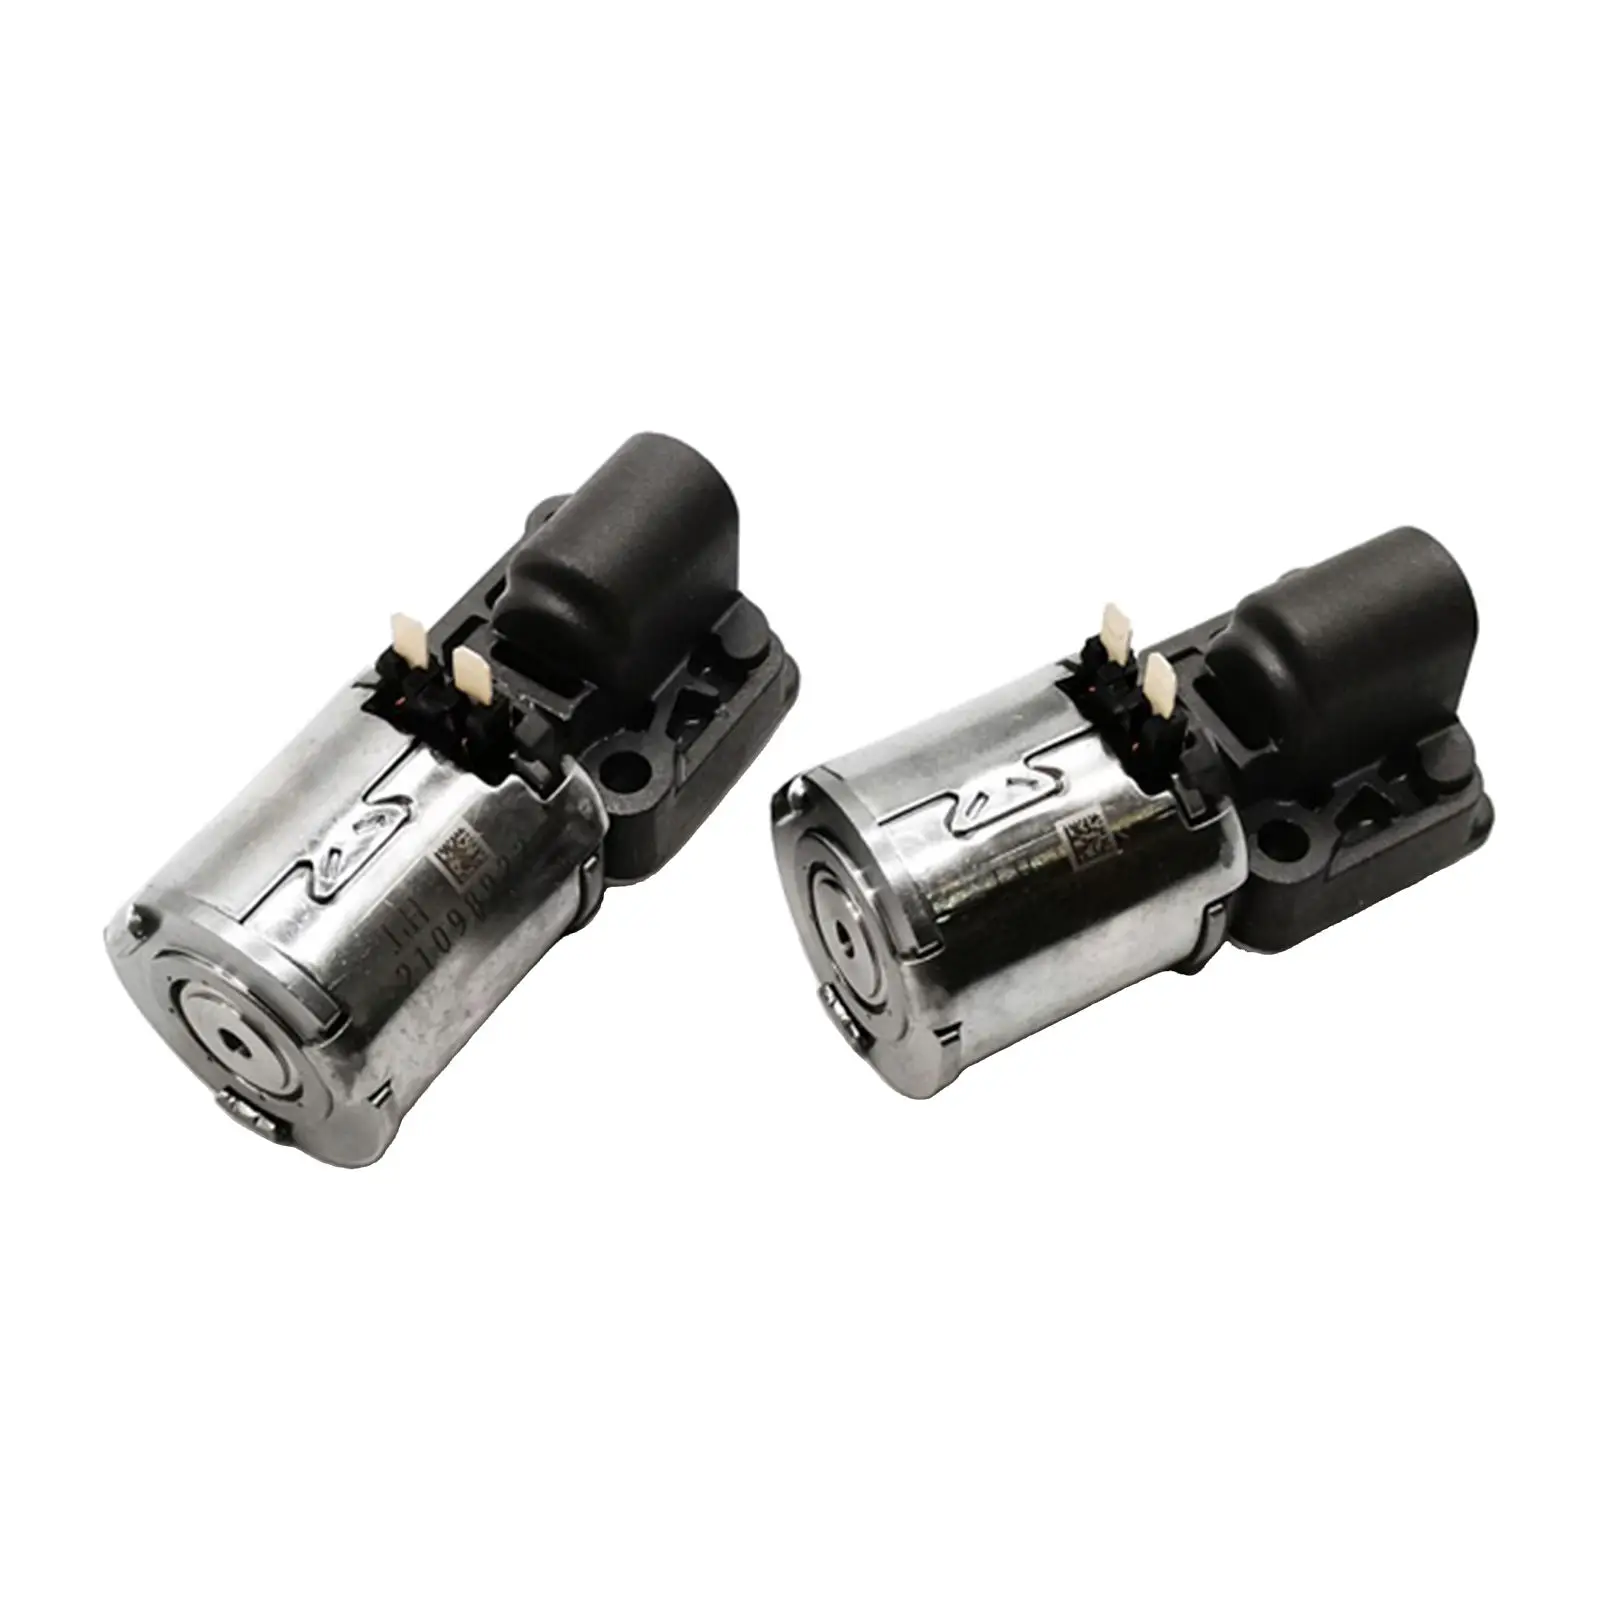 

Set of 2 Engine Transmission Solenoid 0BH Dq500 Solenoid Valve for Audi A4 A5 A6 A7 Q5 2008-11 7 SP